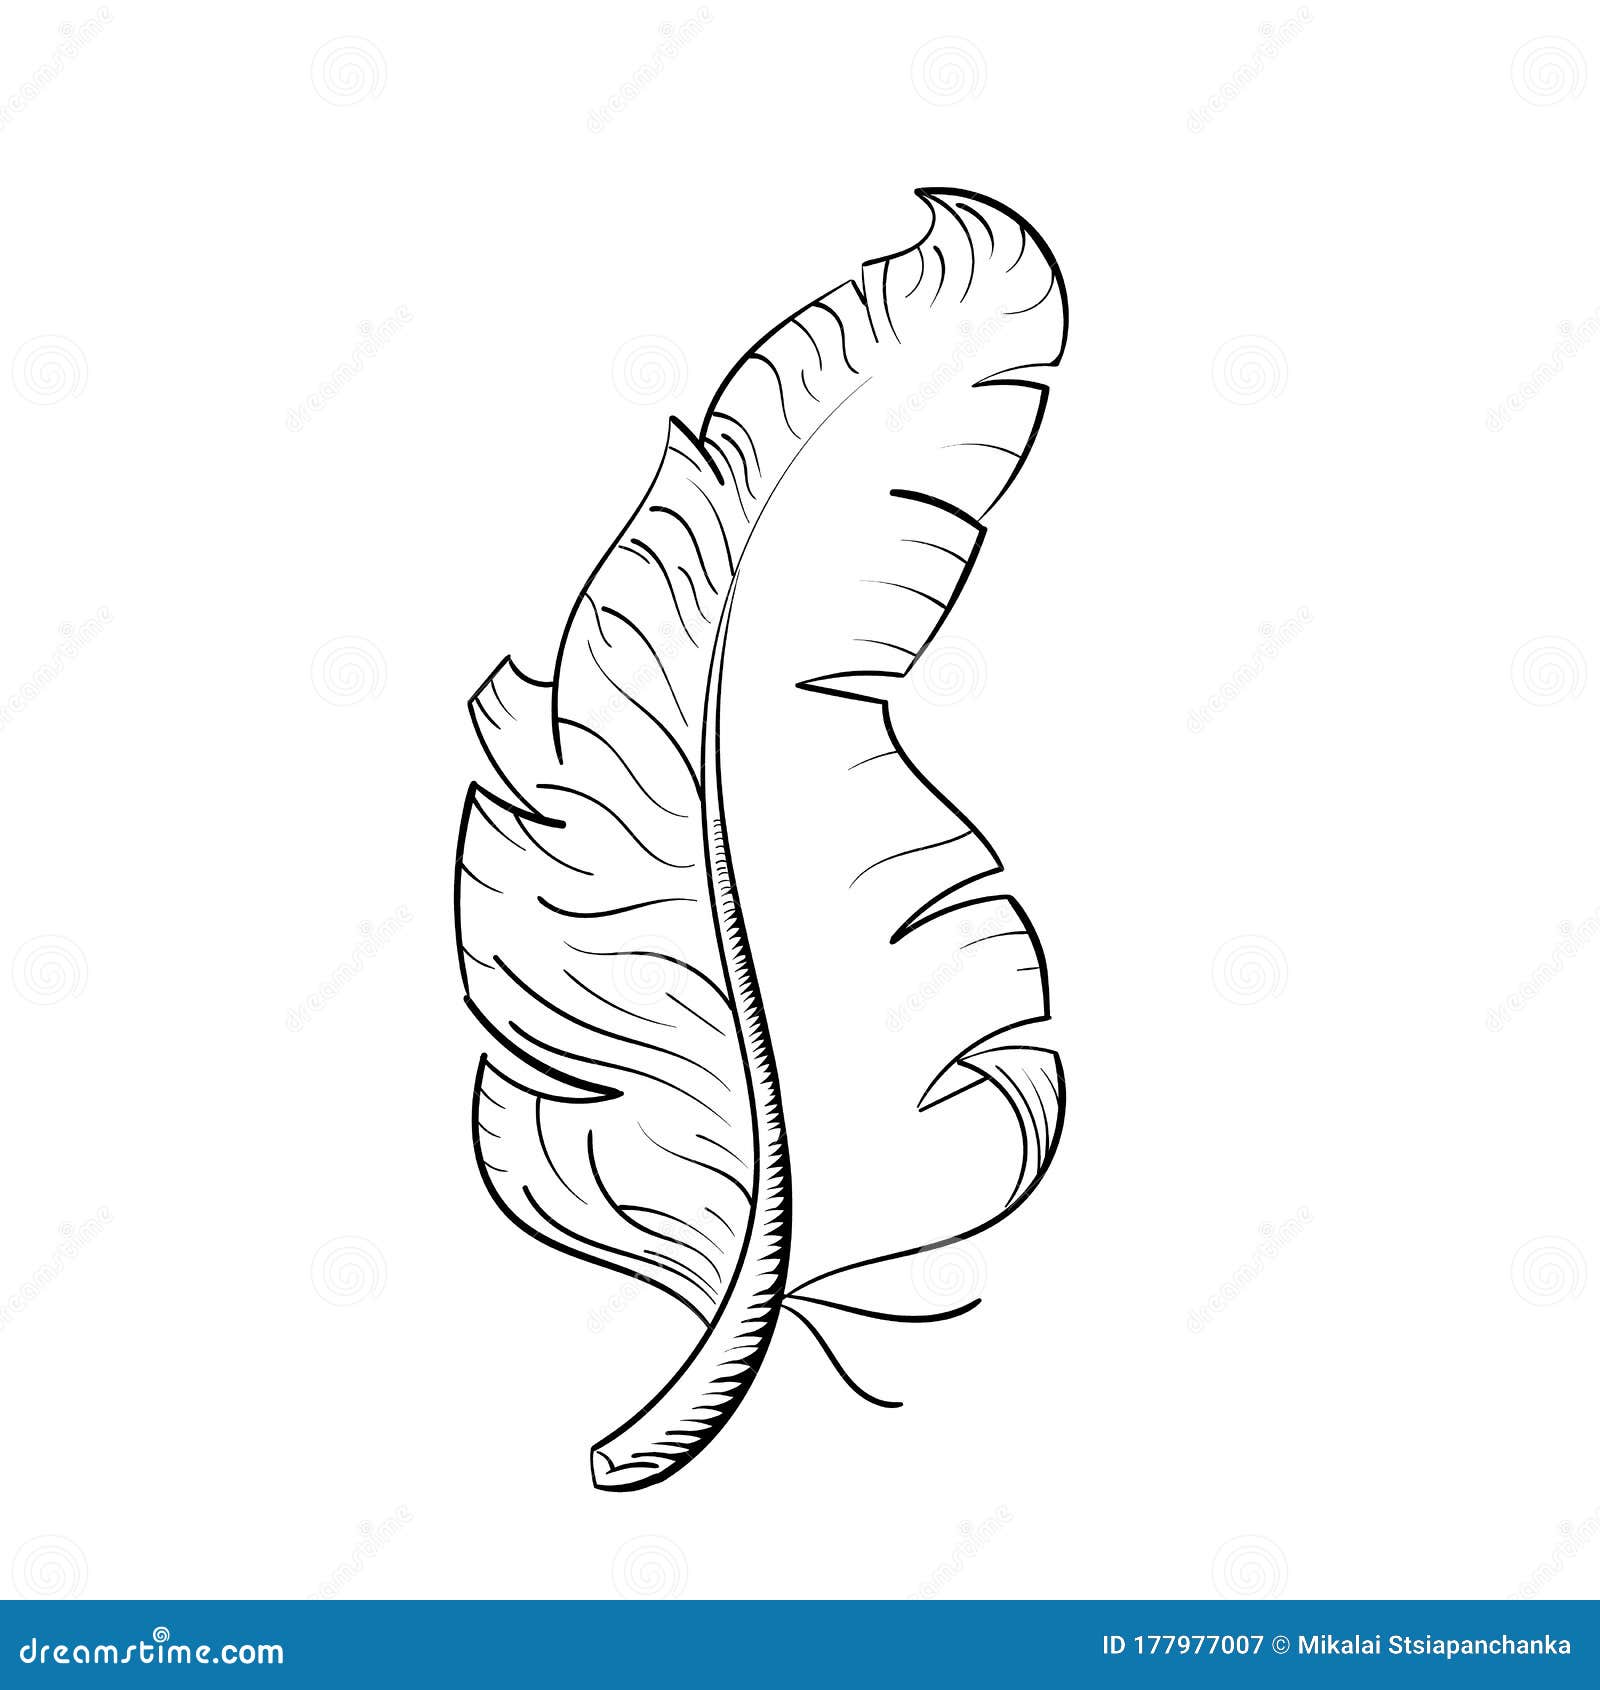 Feather Vector Illustration on White Background. Stock Vector ...